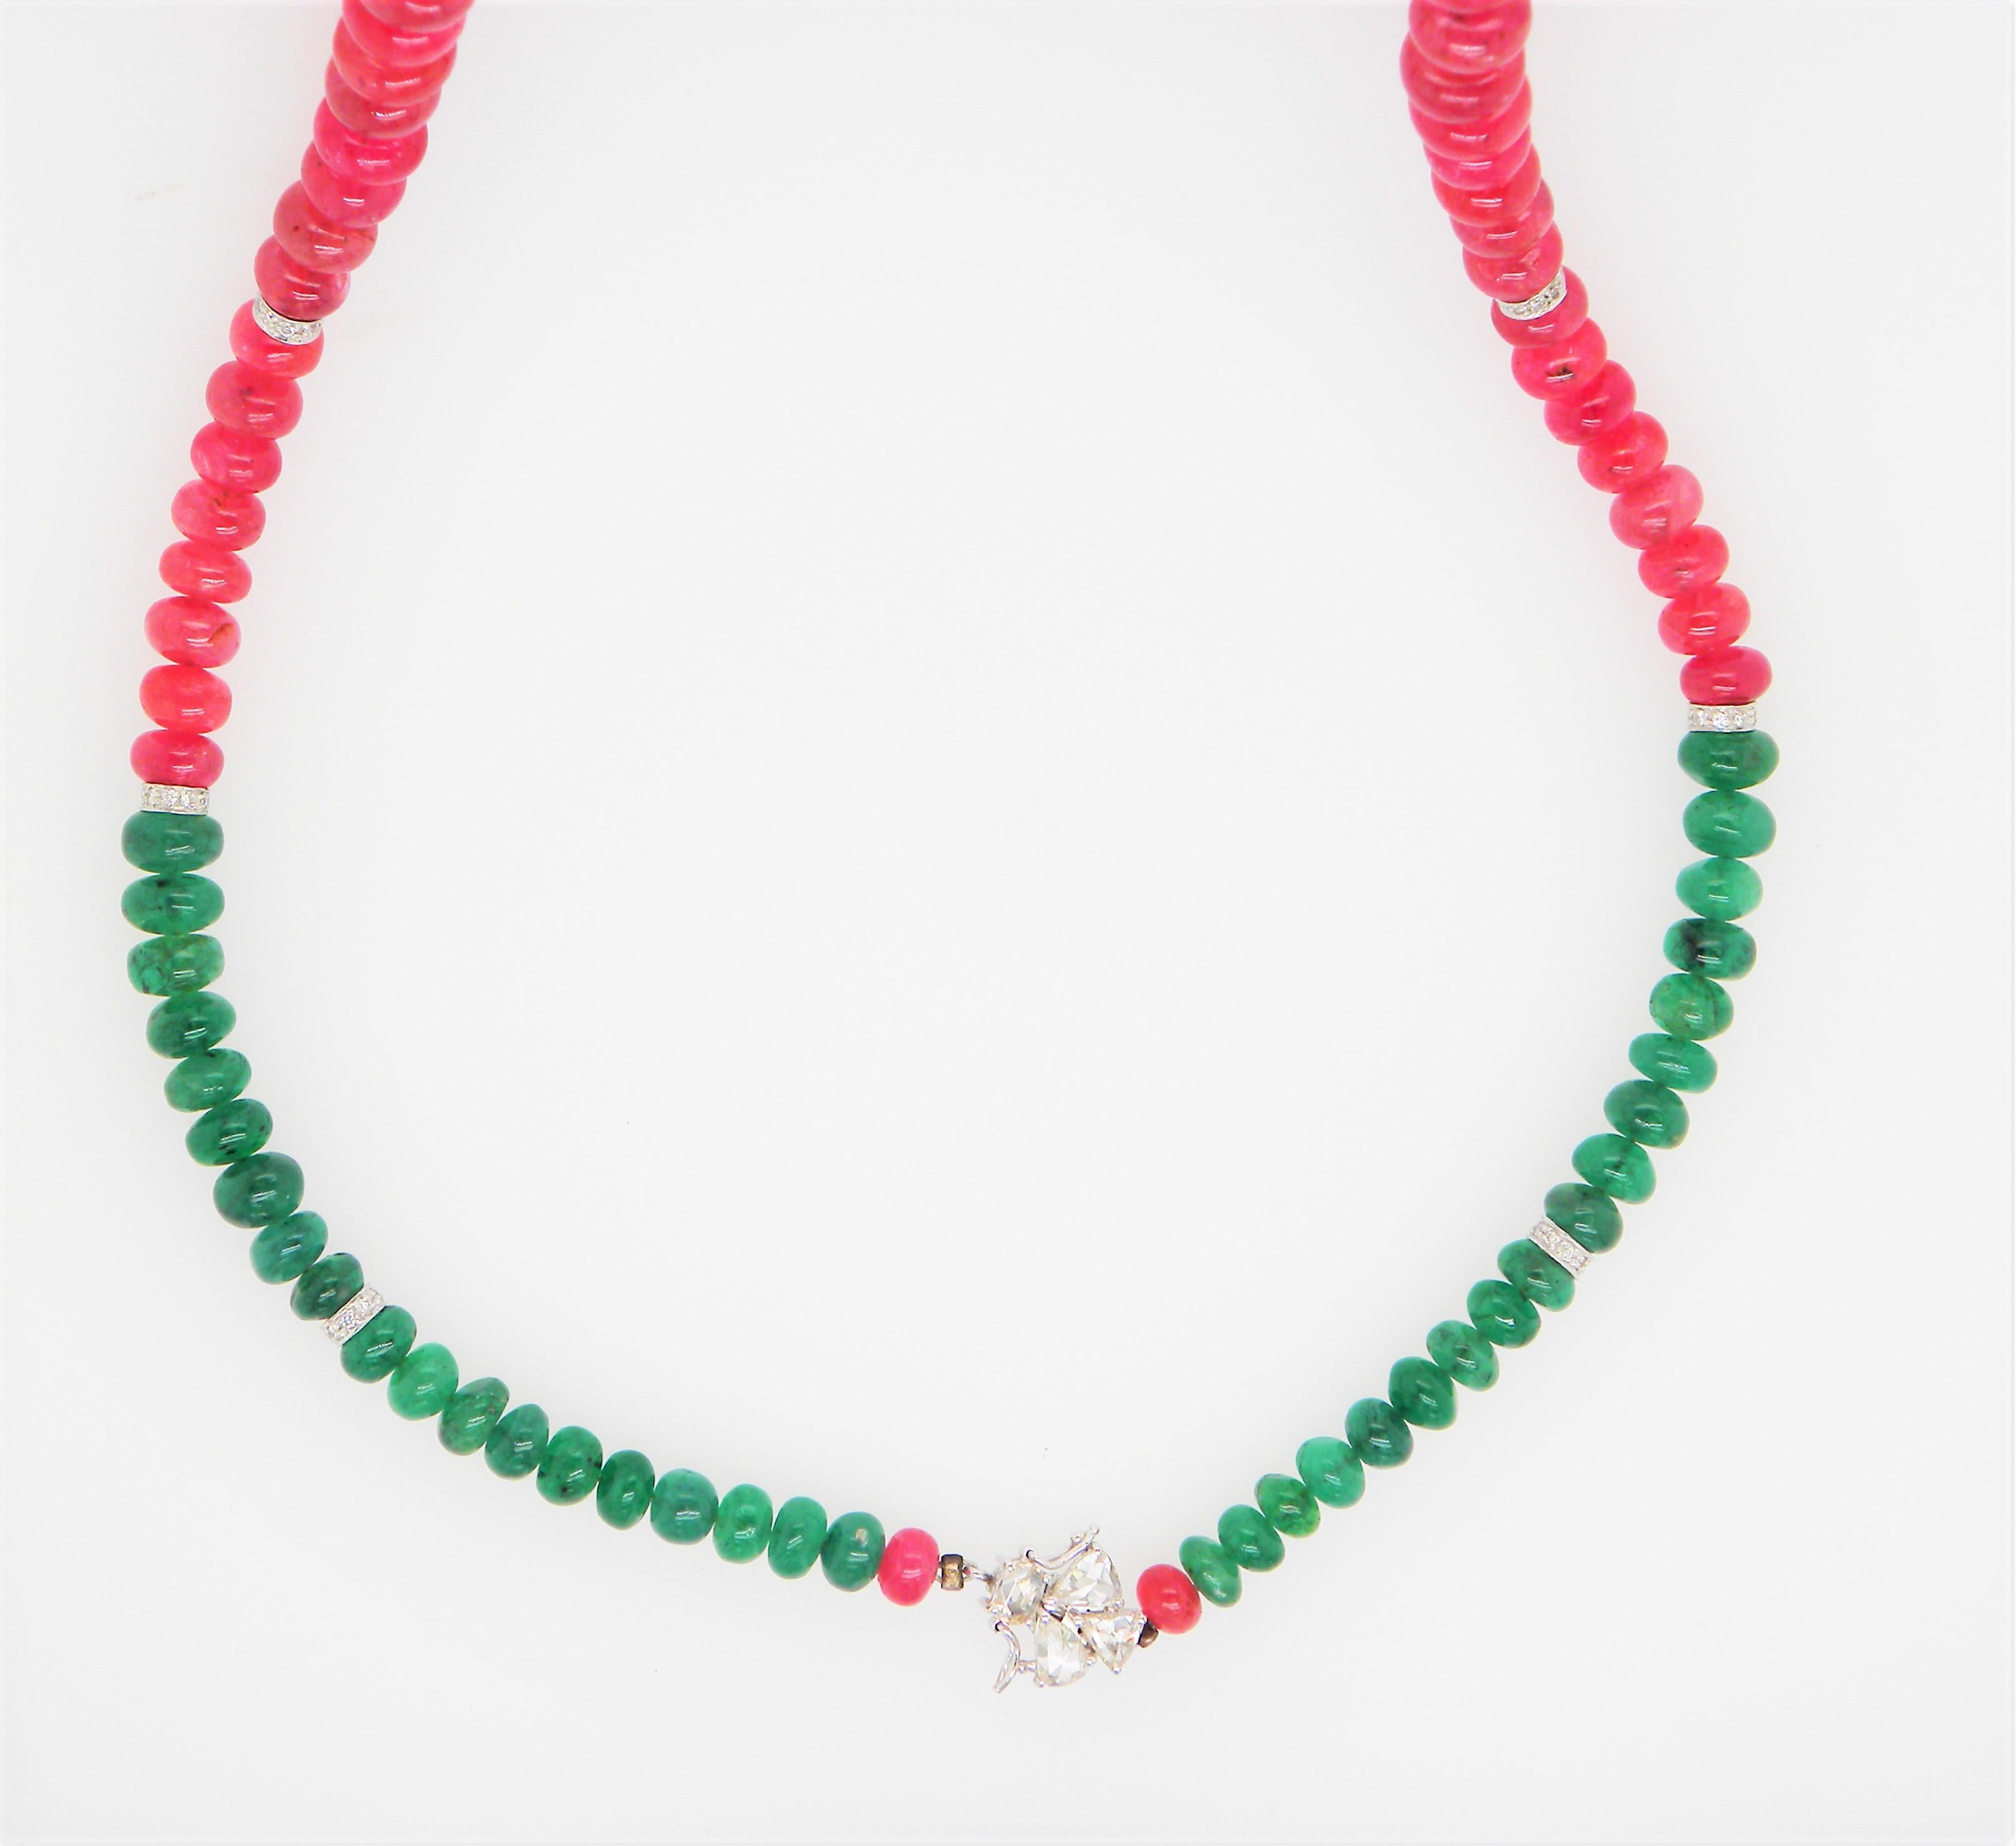 Women's Burmese Ruby and Emerald Beads White Diamond Gold Necklace For Sale